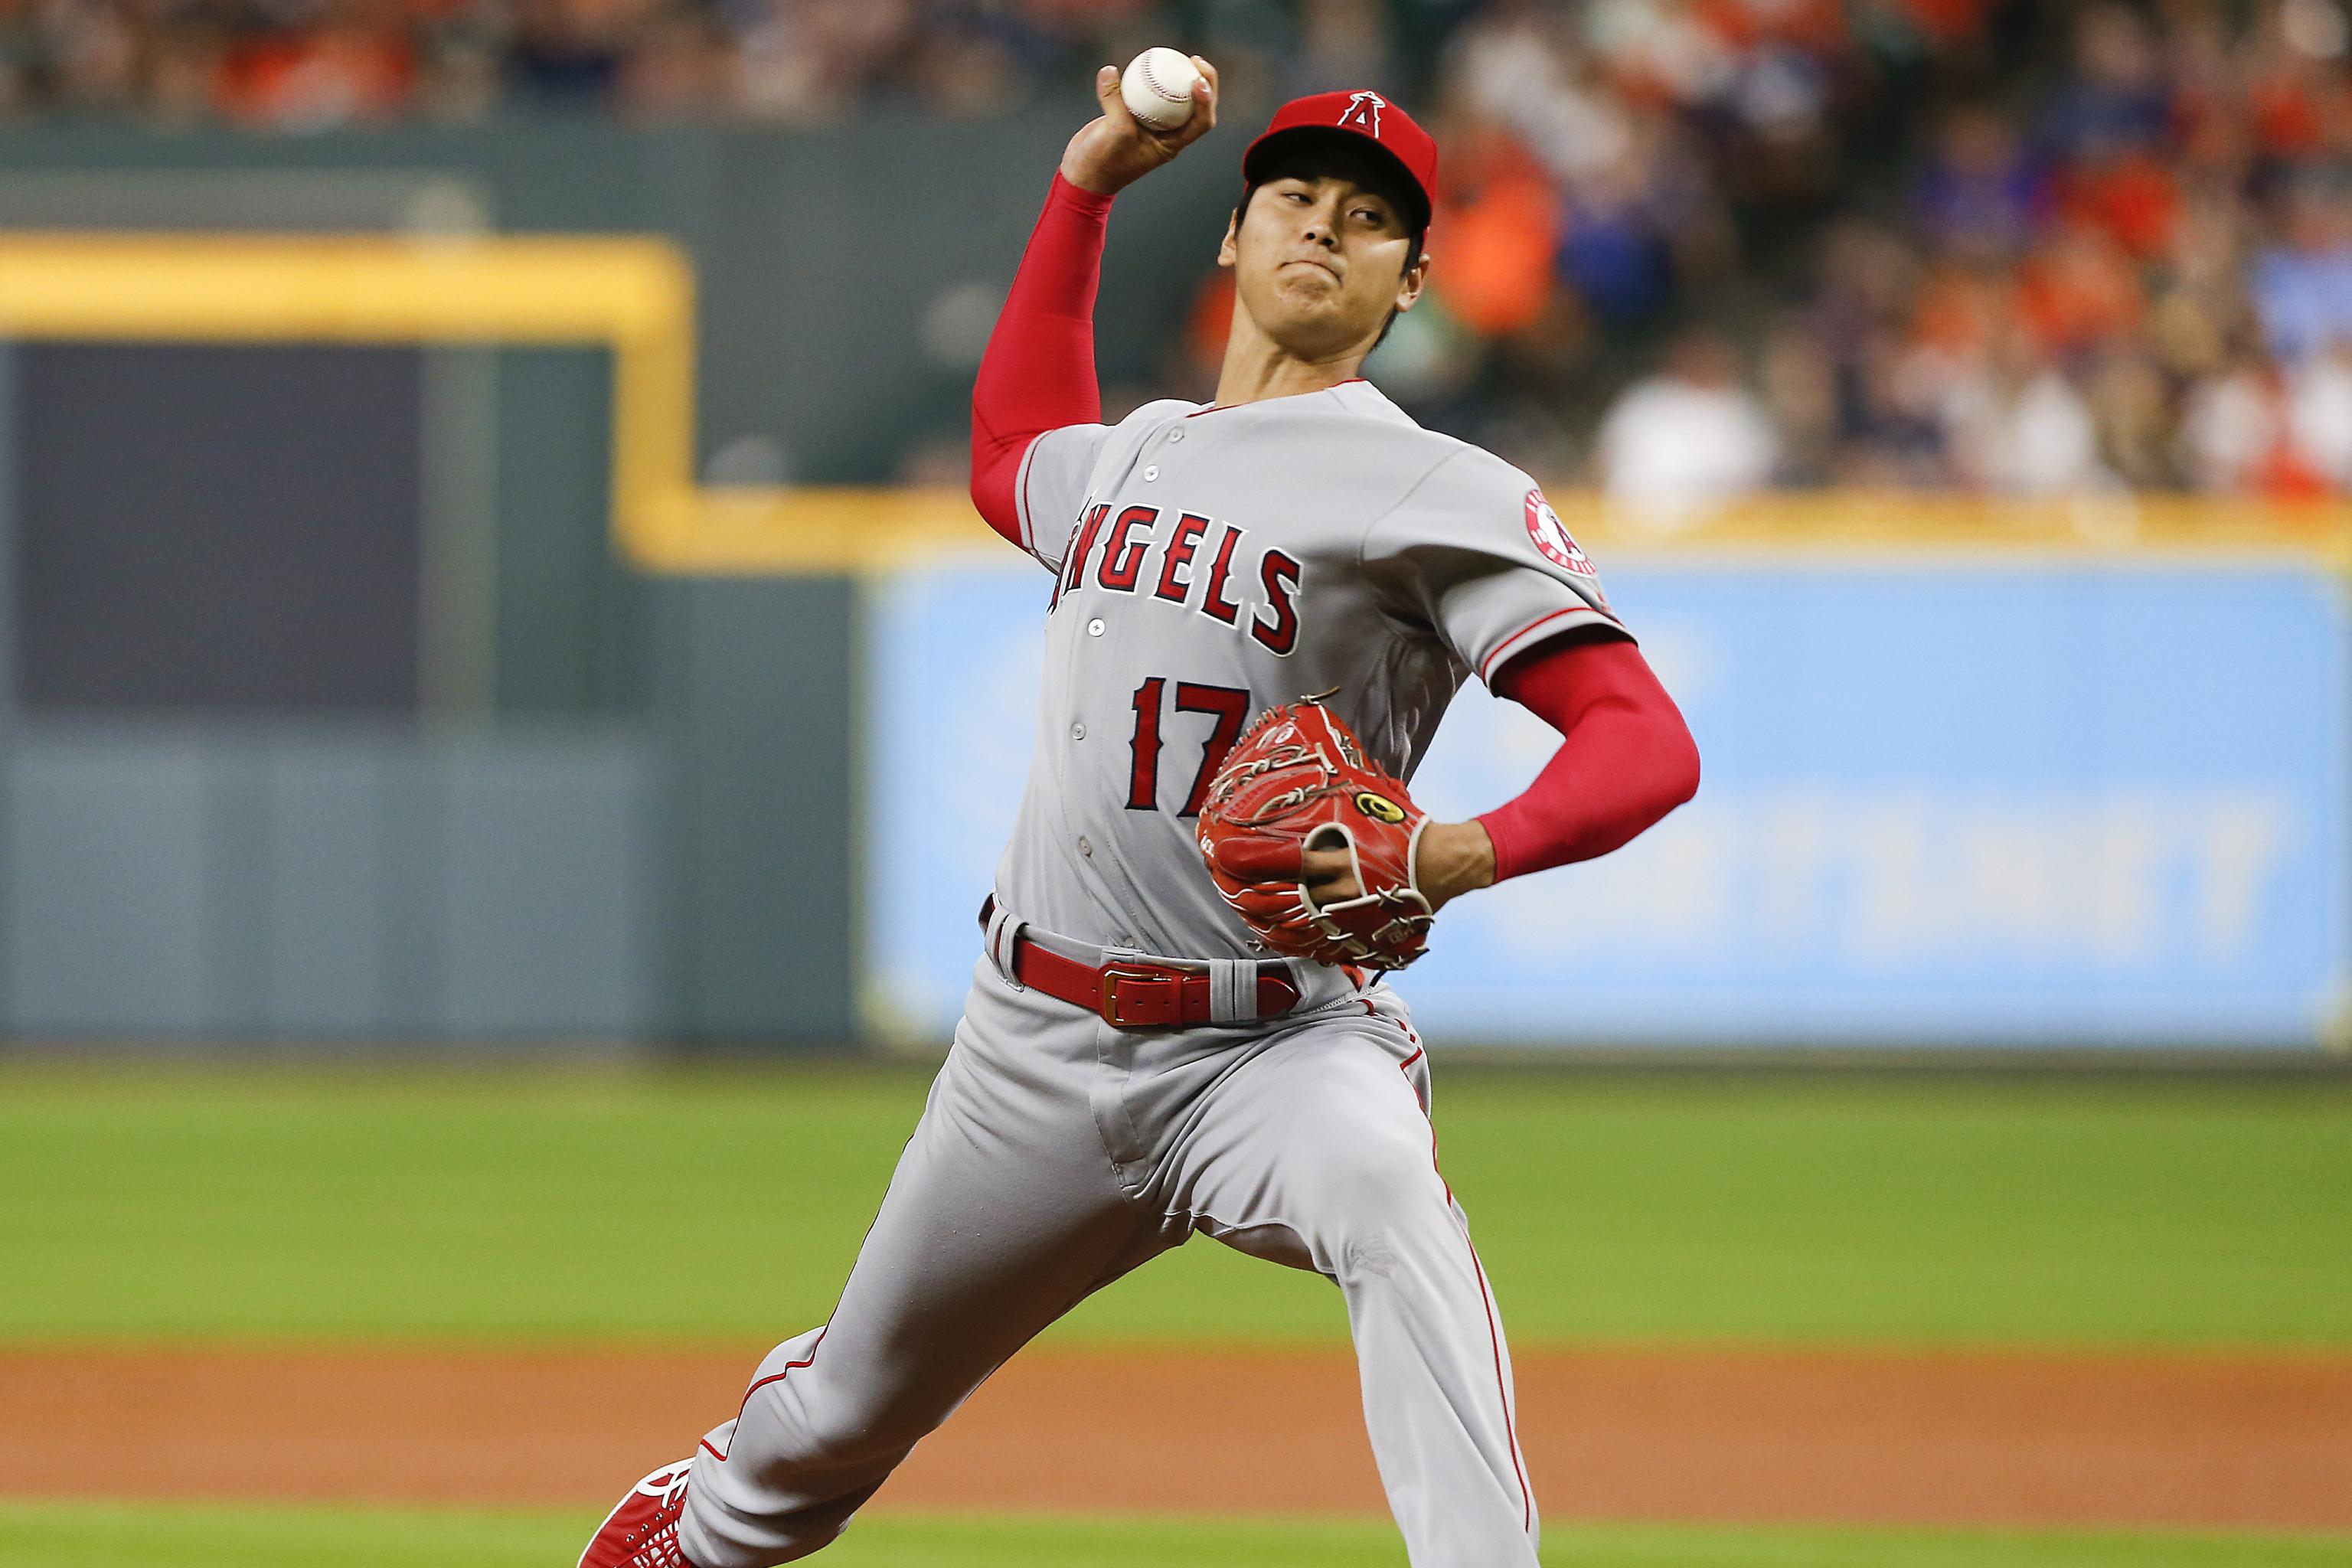 Shohei Ohtani keeps chasing Babe Ruth's ghost with another record